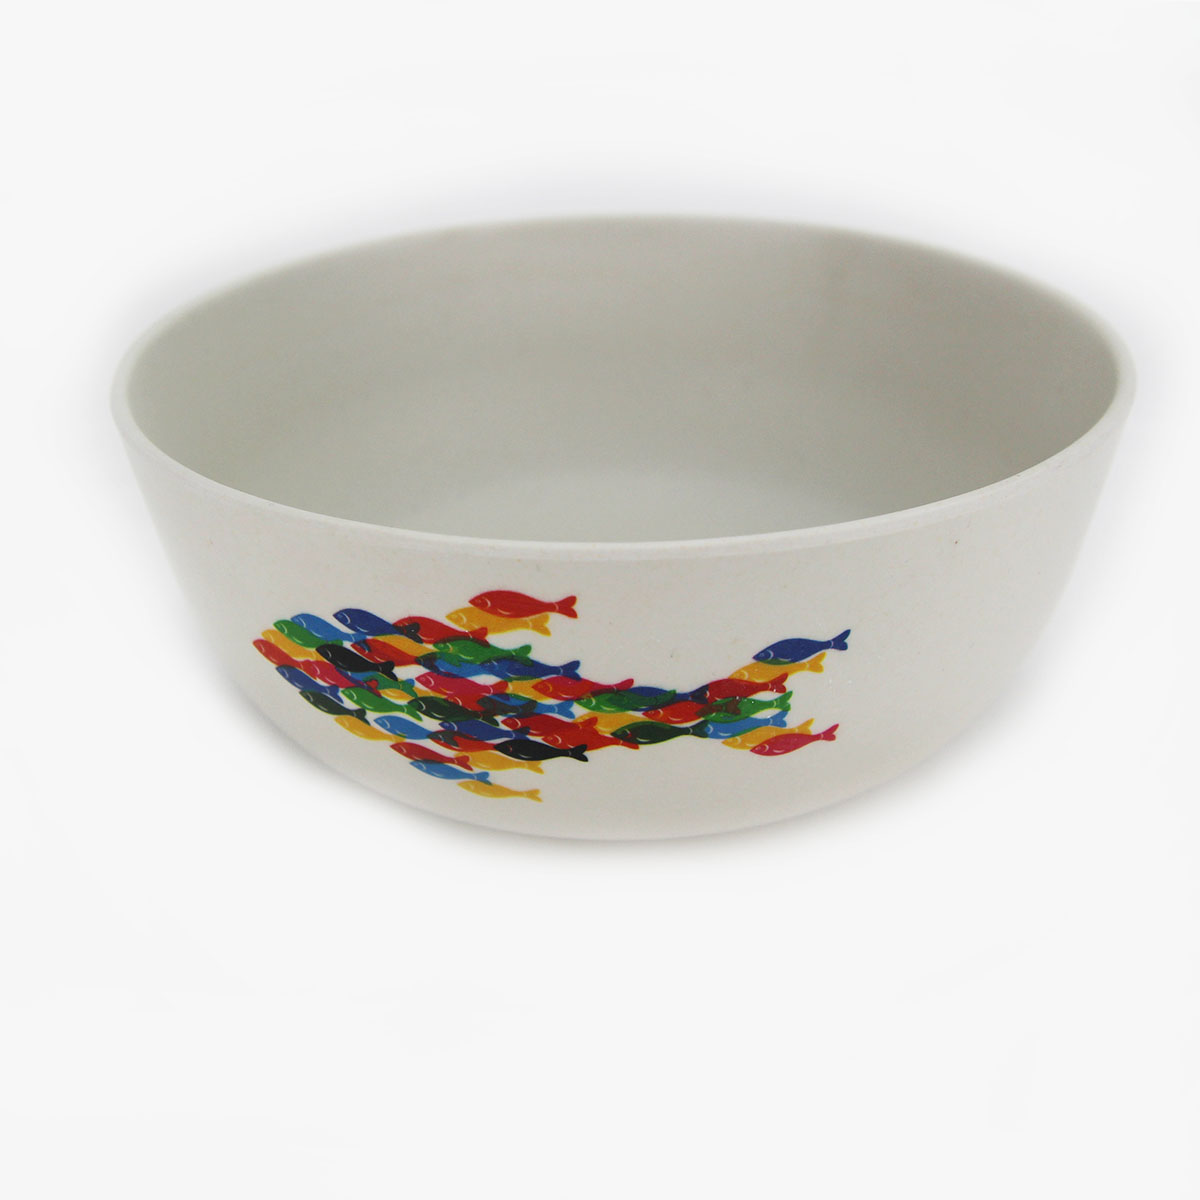 New Product Biodegradable Bamboo Fiber Noodle Bowl